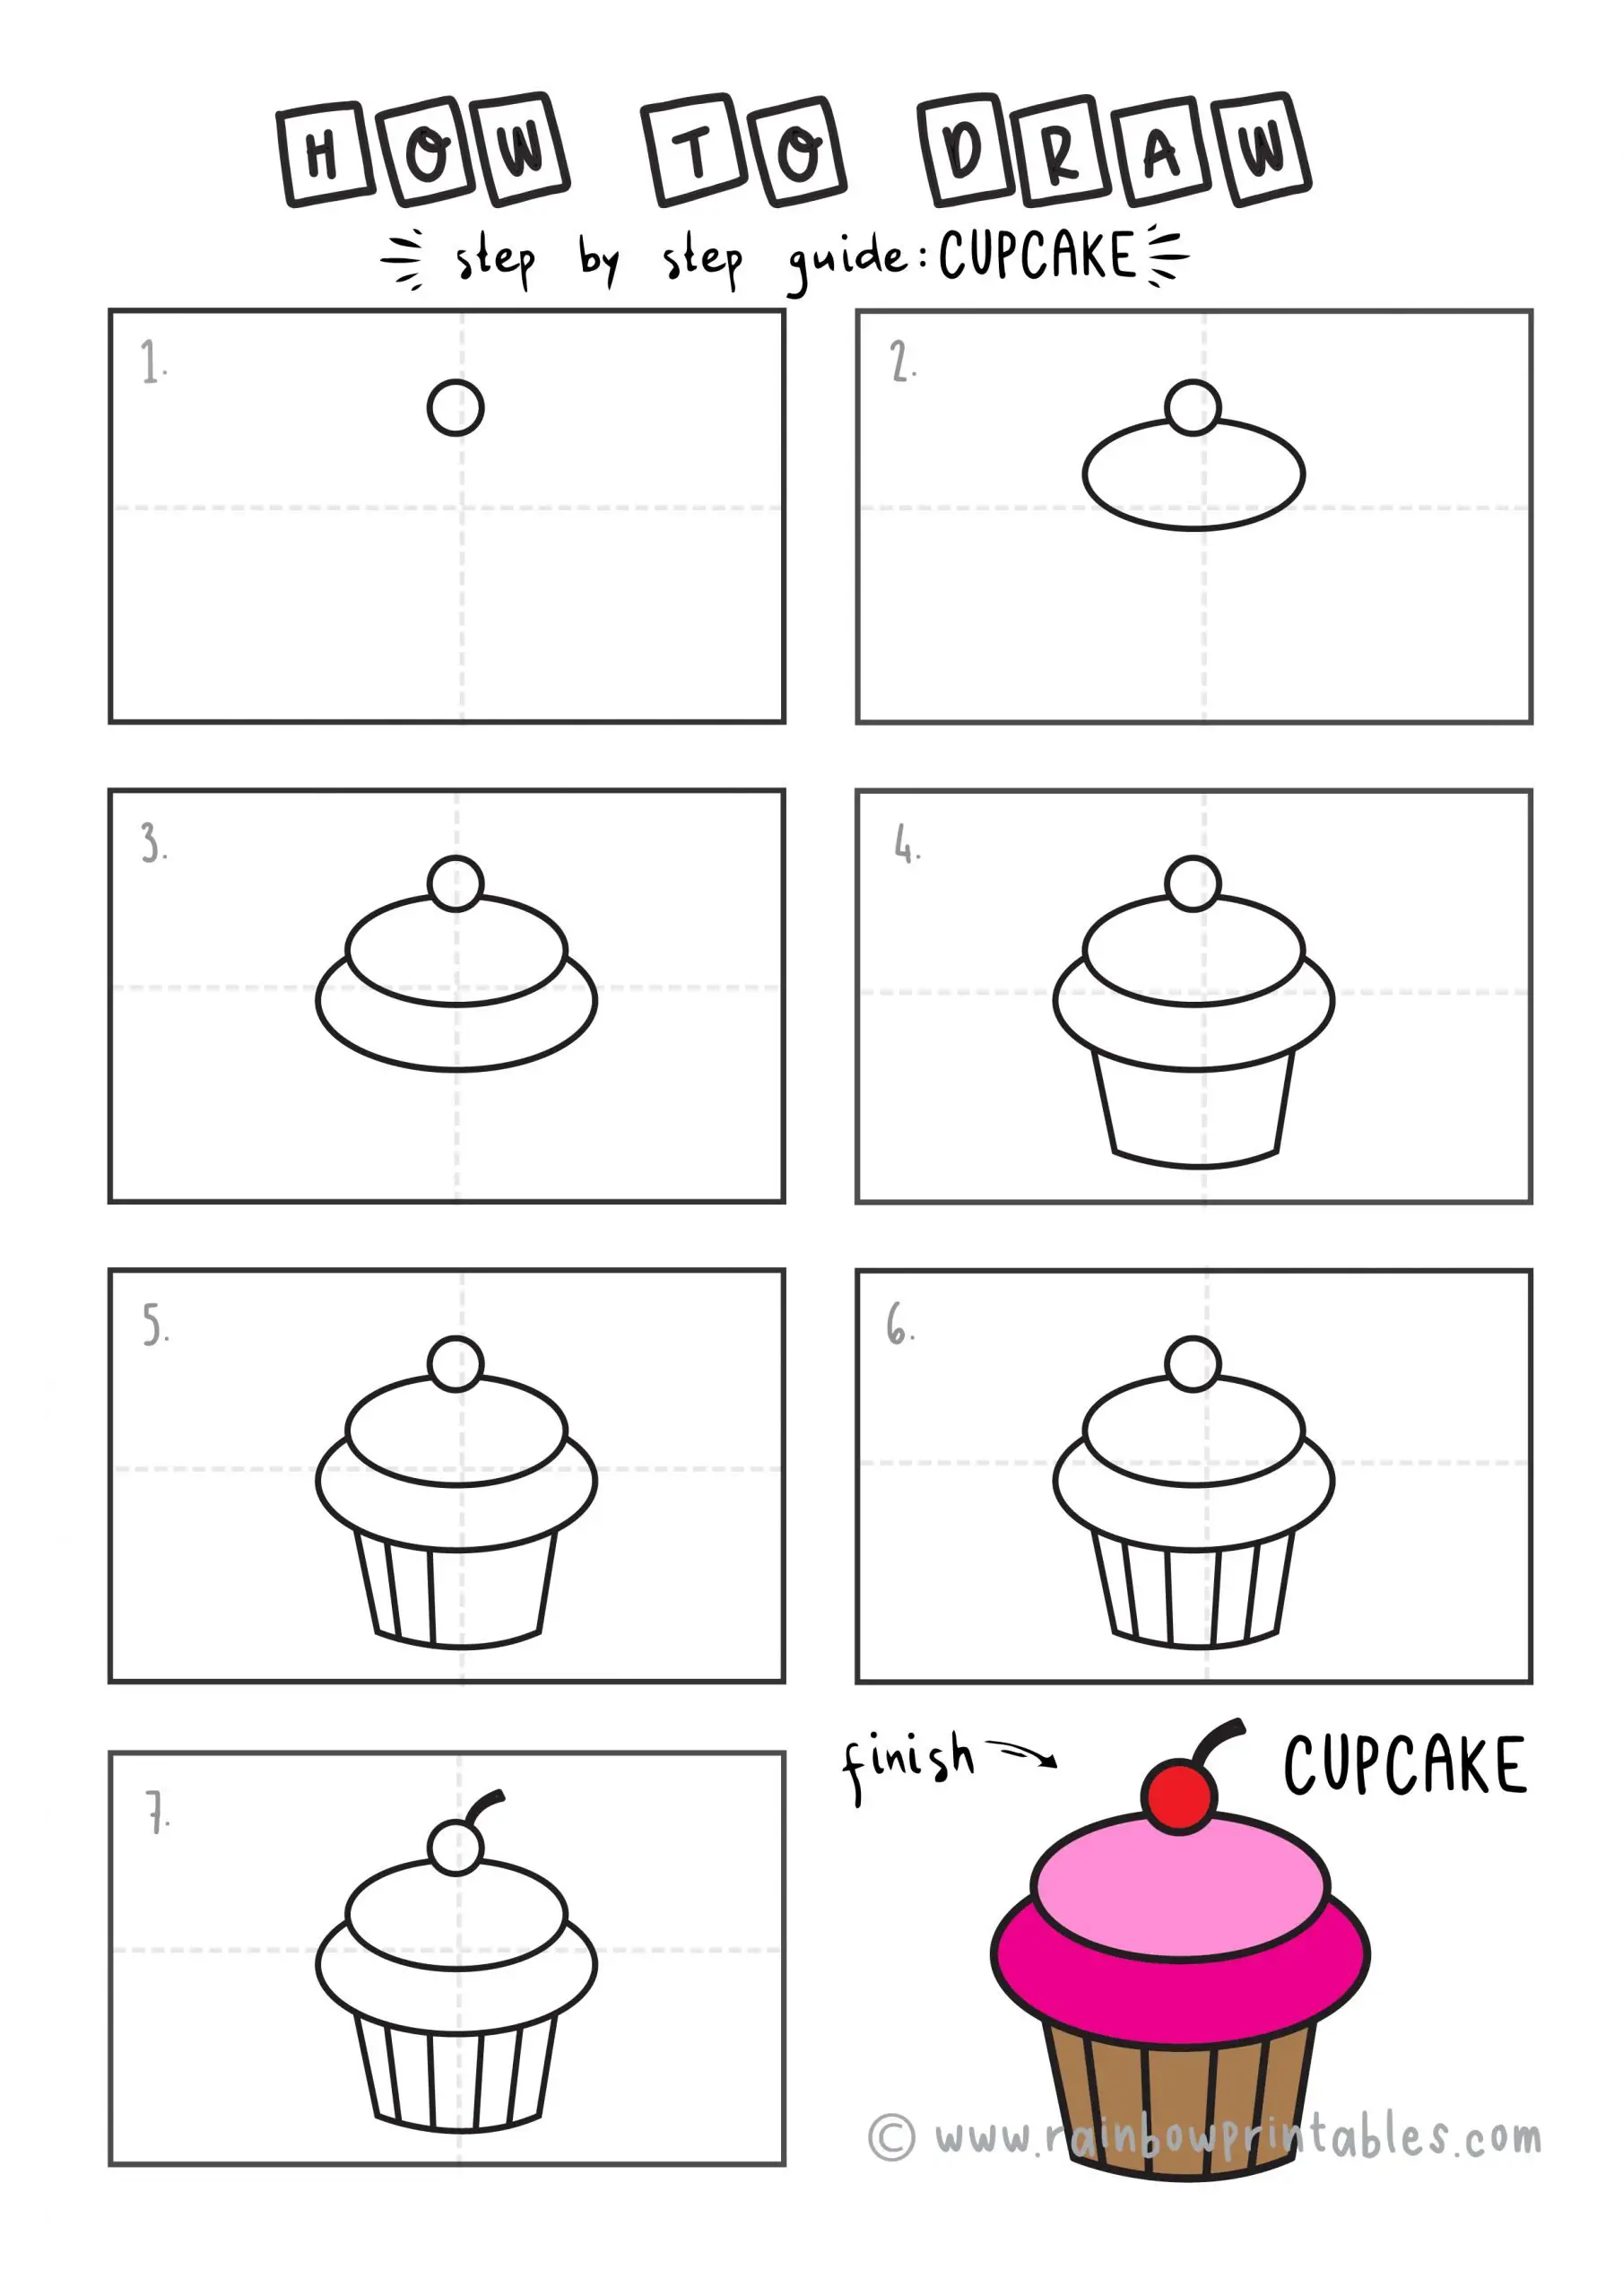 How To Draw a CUPCAKE Step by Step for Beginners and Kids | Easy and Simple | Printable Drawing Worksheet